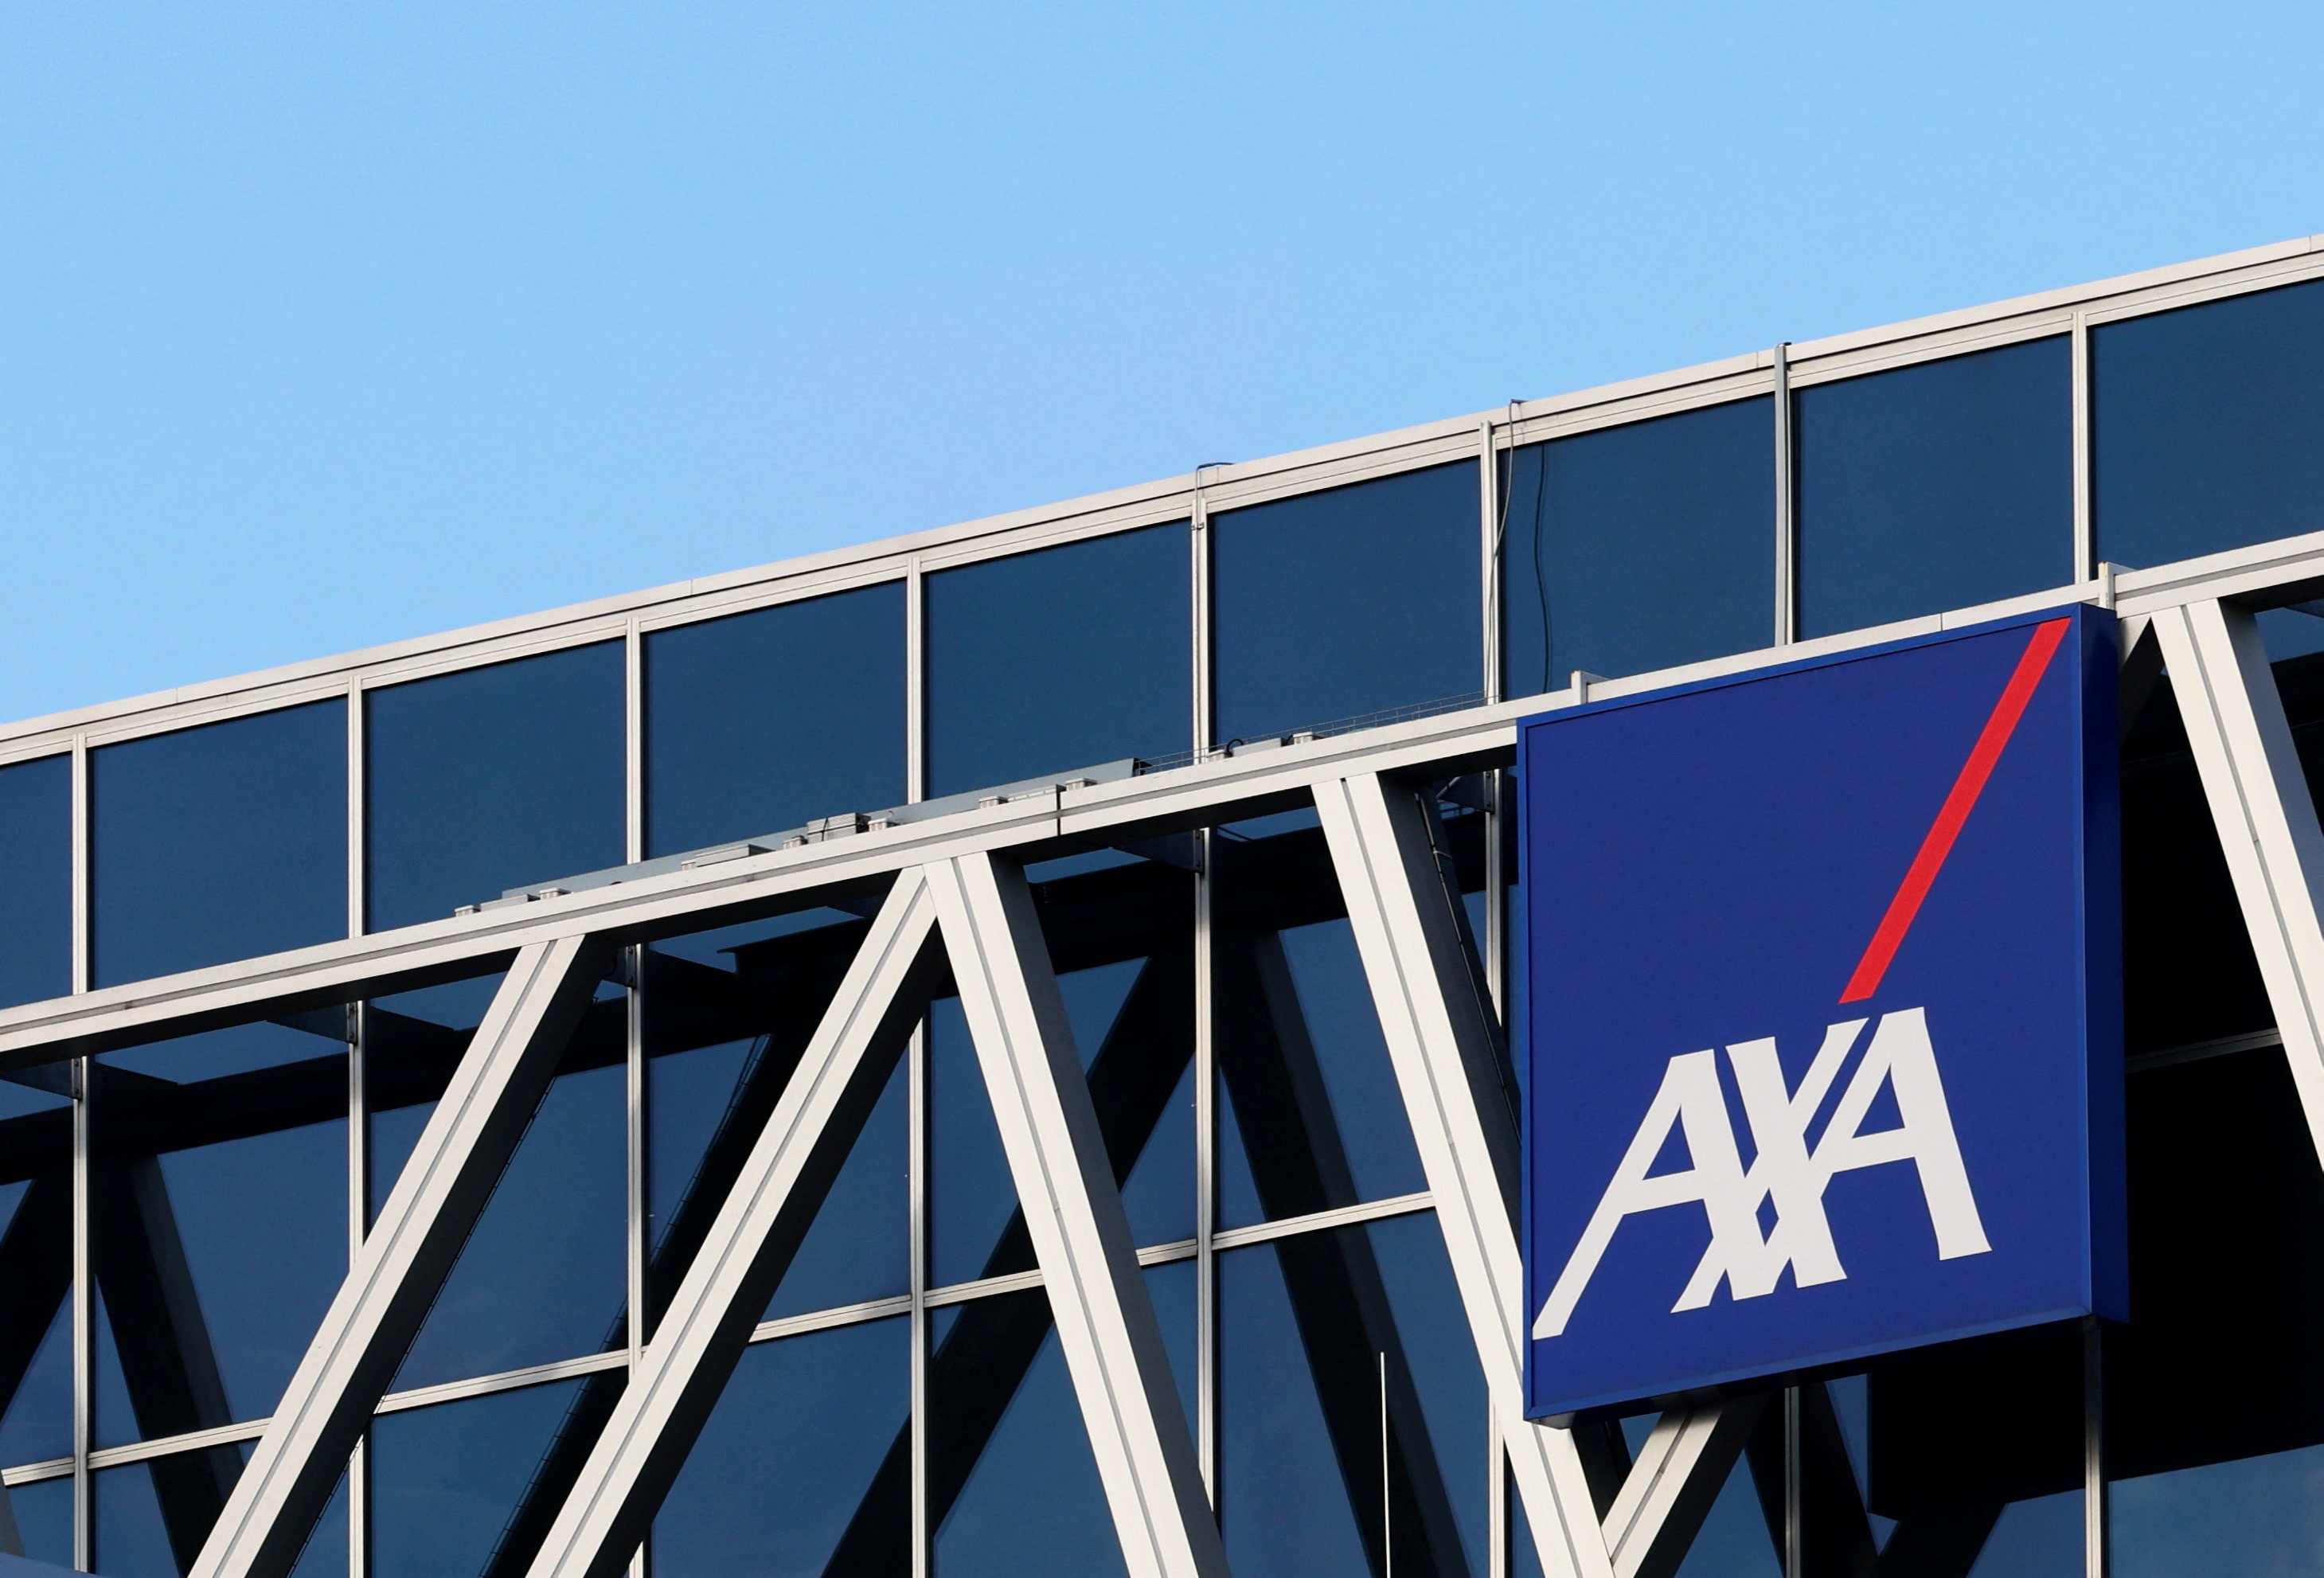 The logo of insurer and bank AXA Belgium S.A. is seen in Brussels